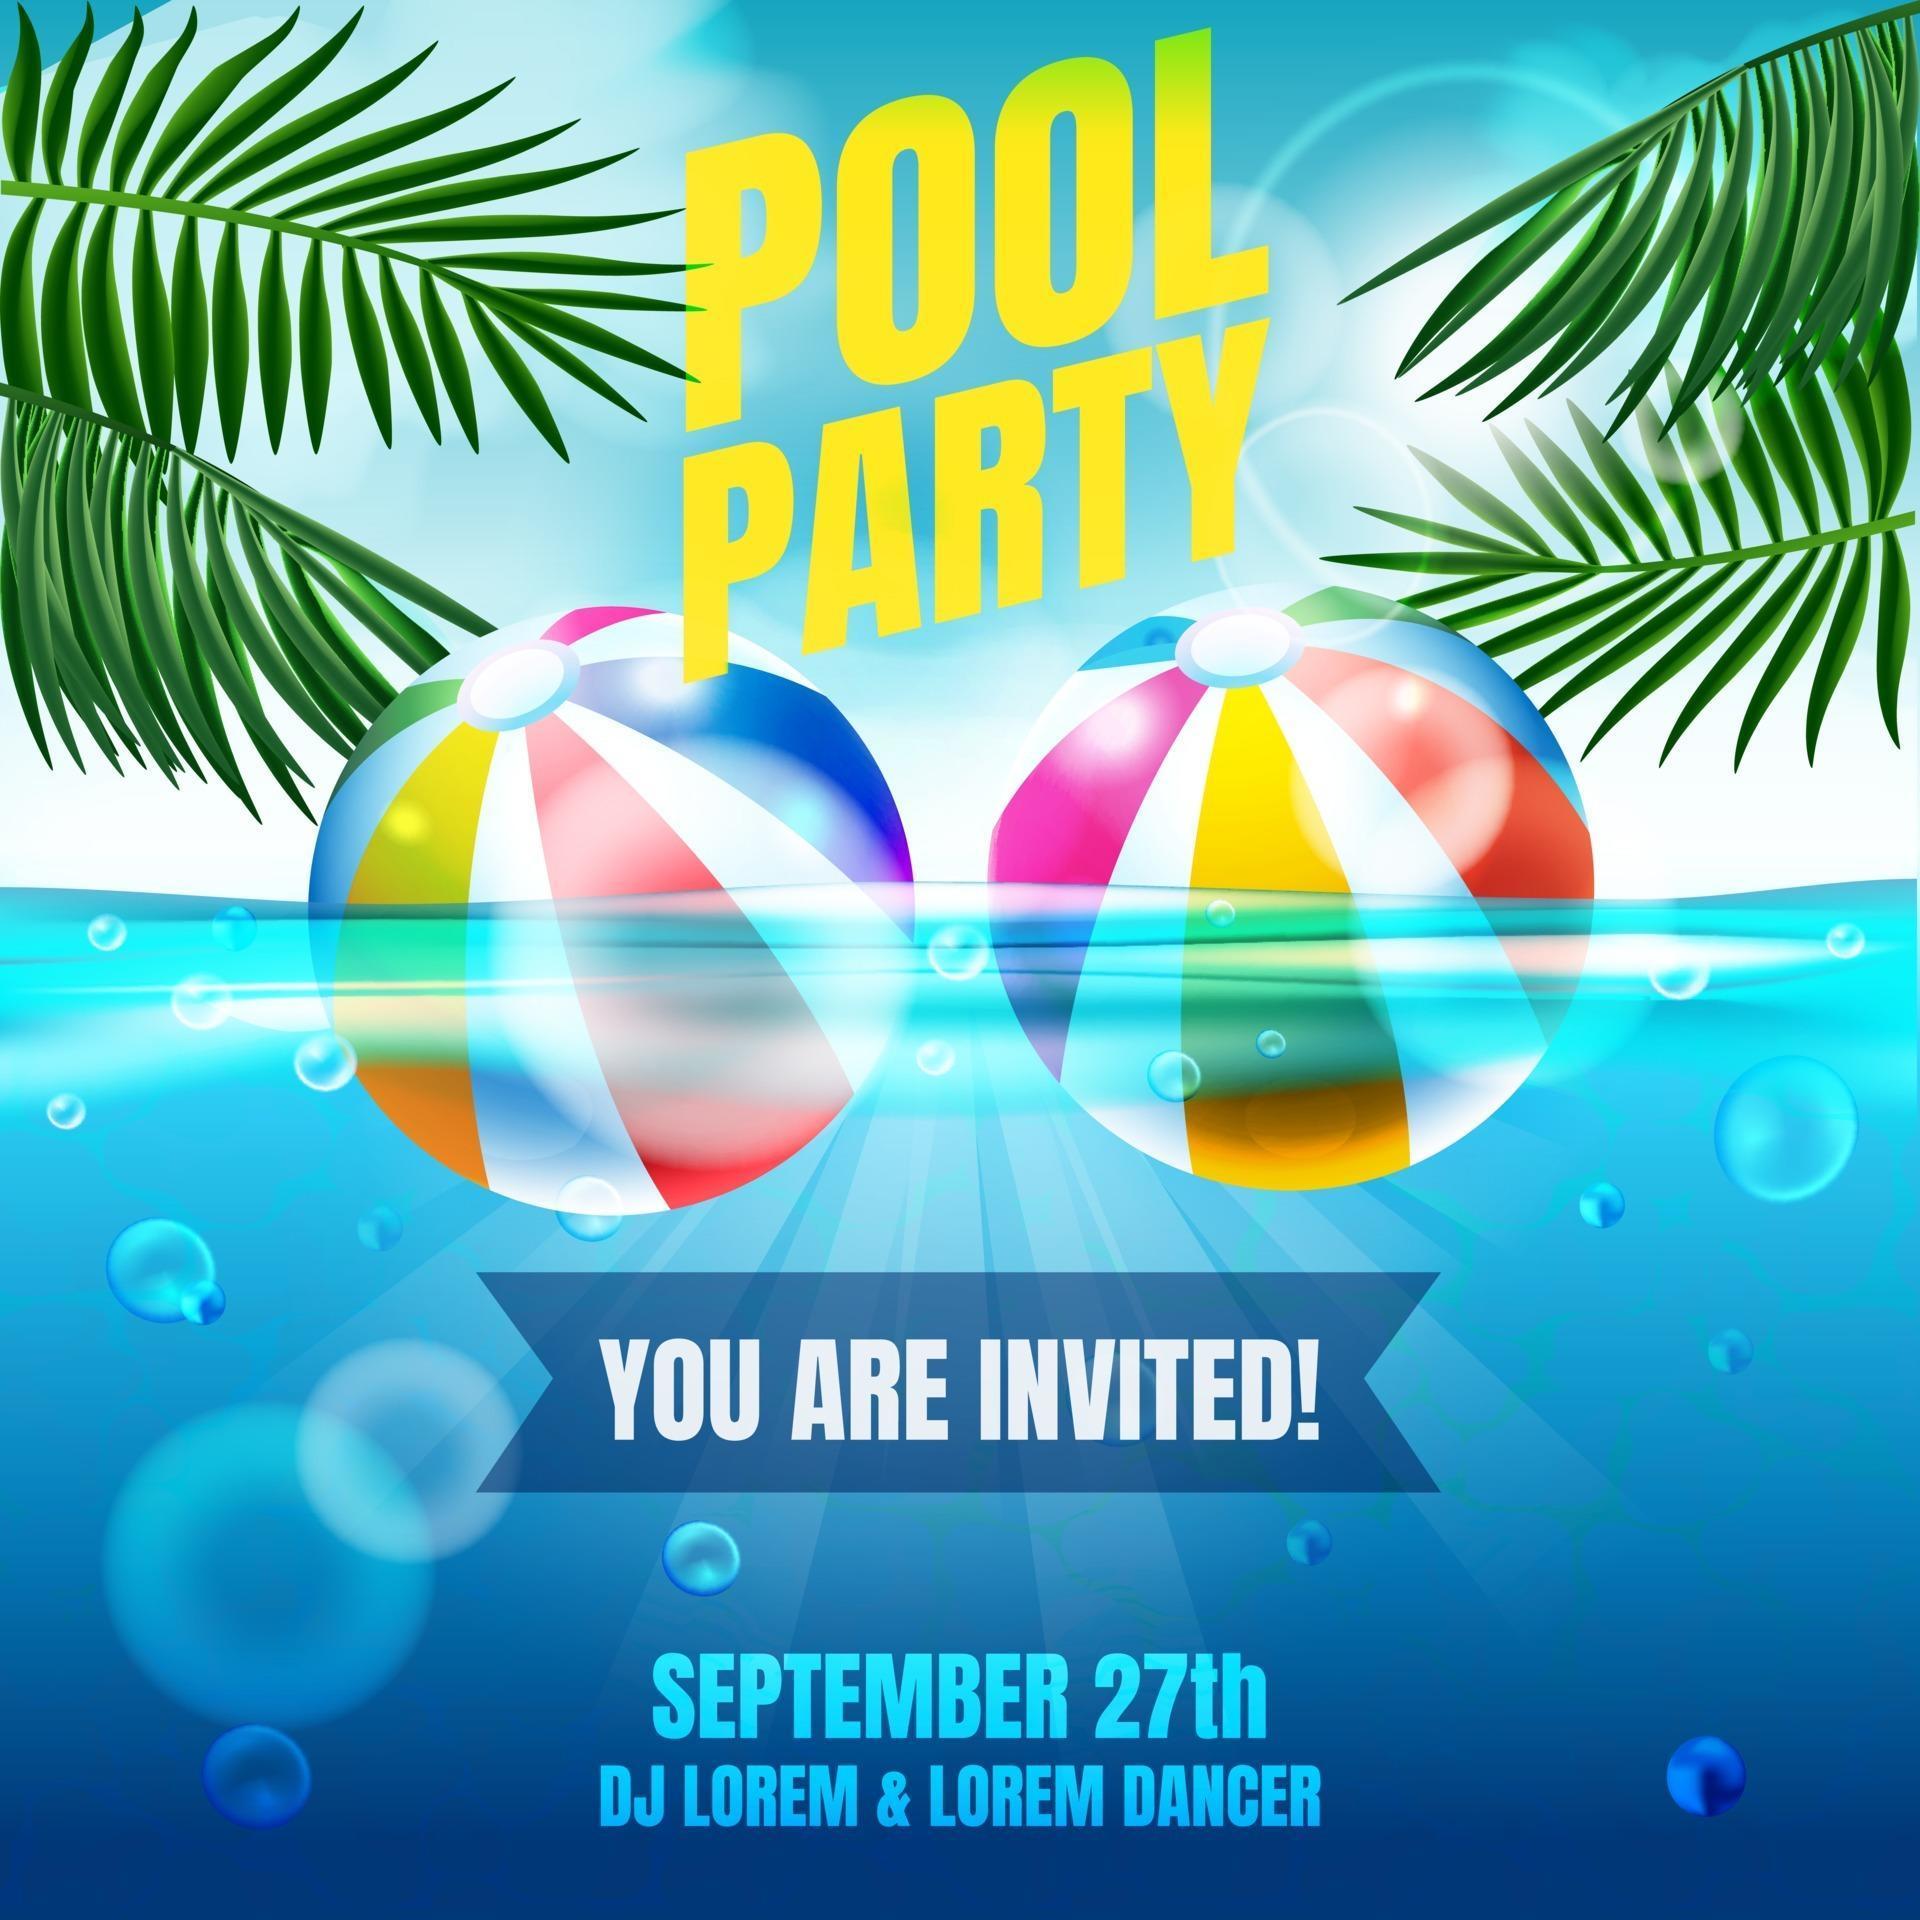 Pool Party Invitation Poster with Swimming Pool Scenery and Two Beach